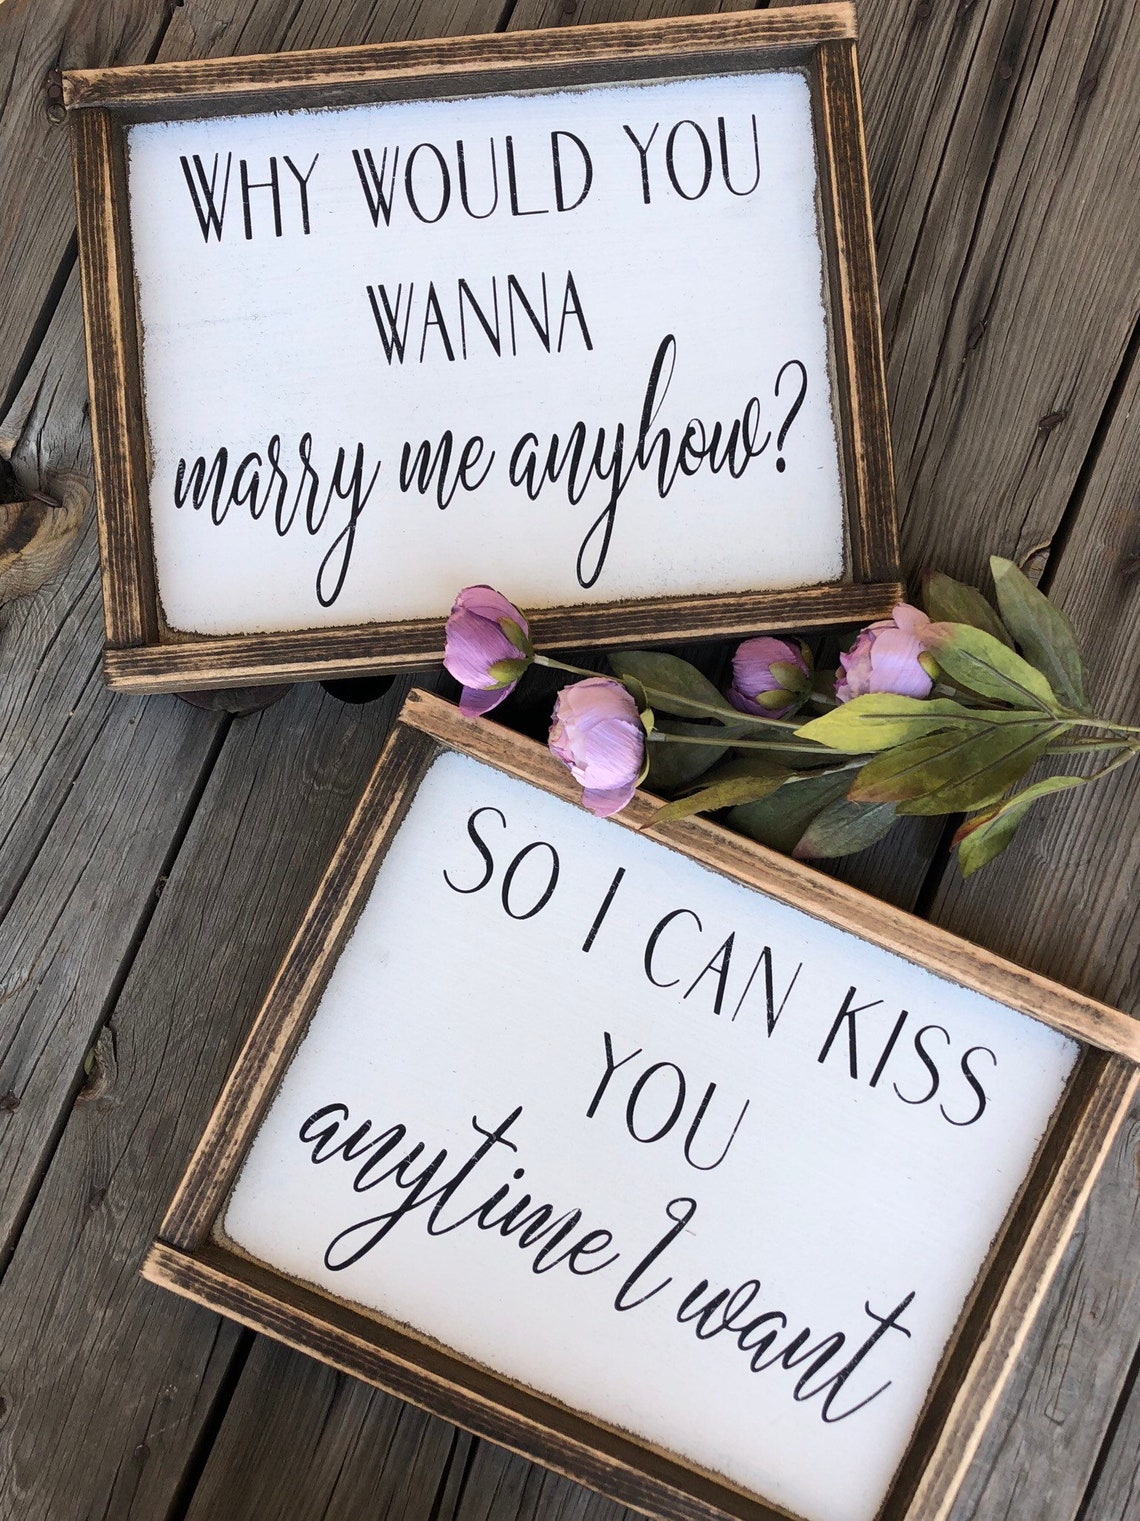 Why Would You Wanna Marry Me Anyhow So I Can Kiss You Anytime Etsy